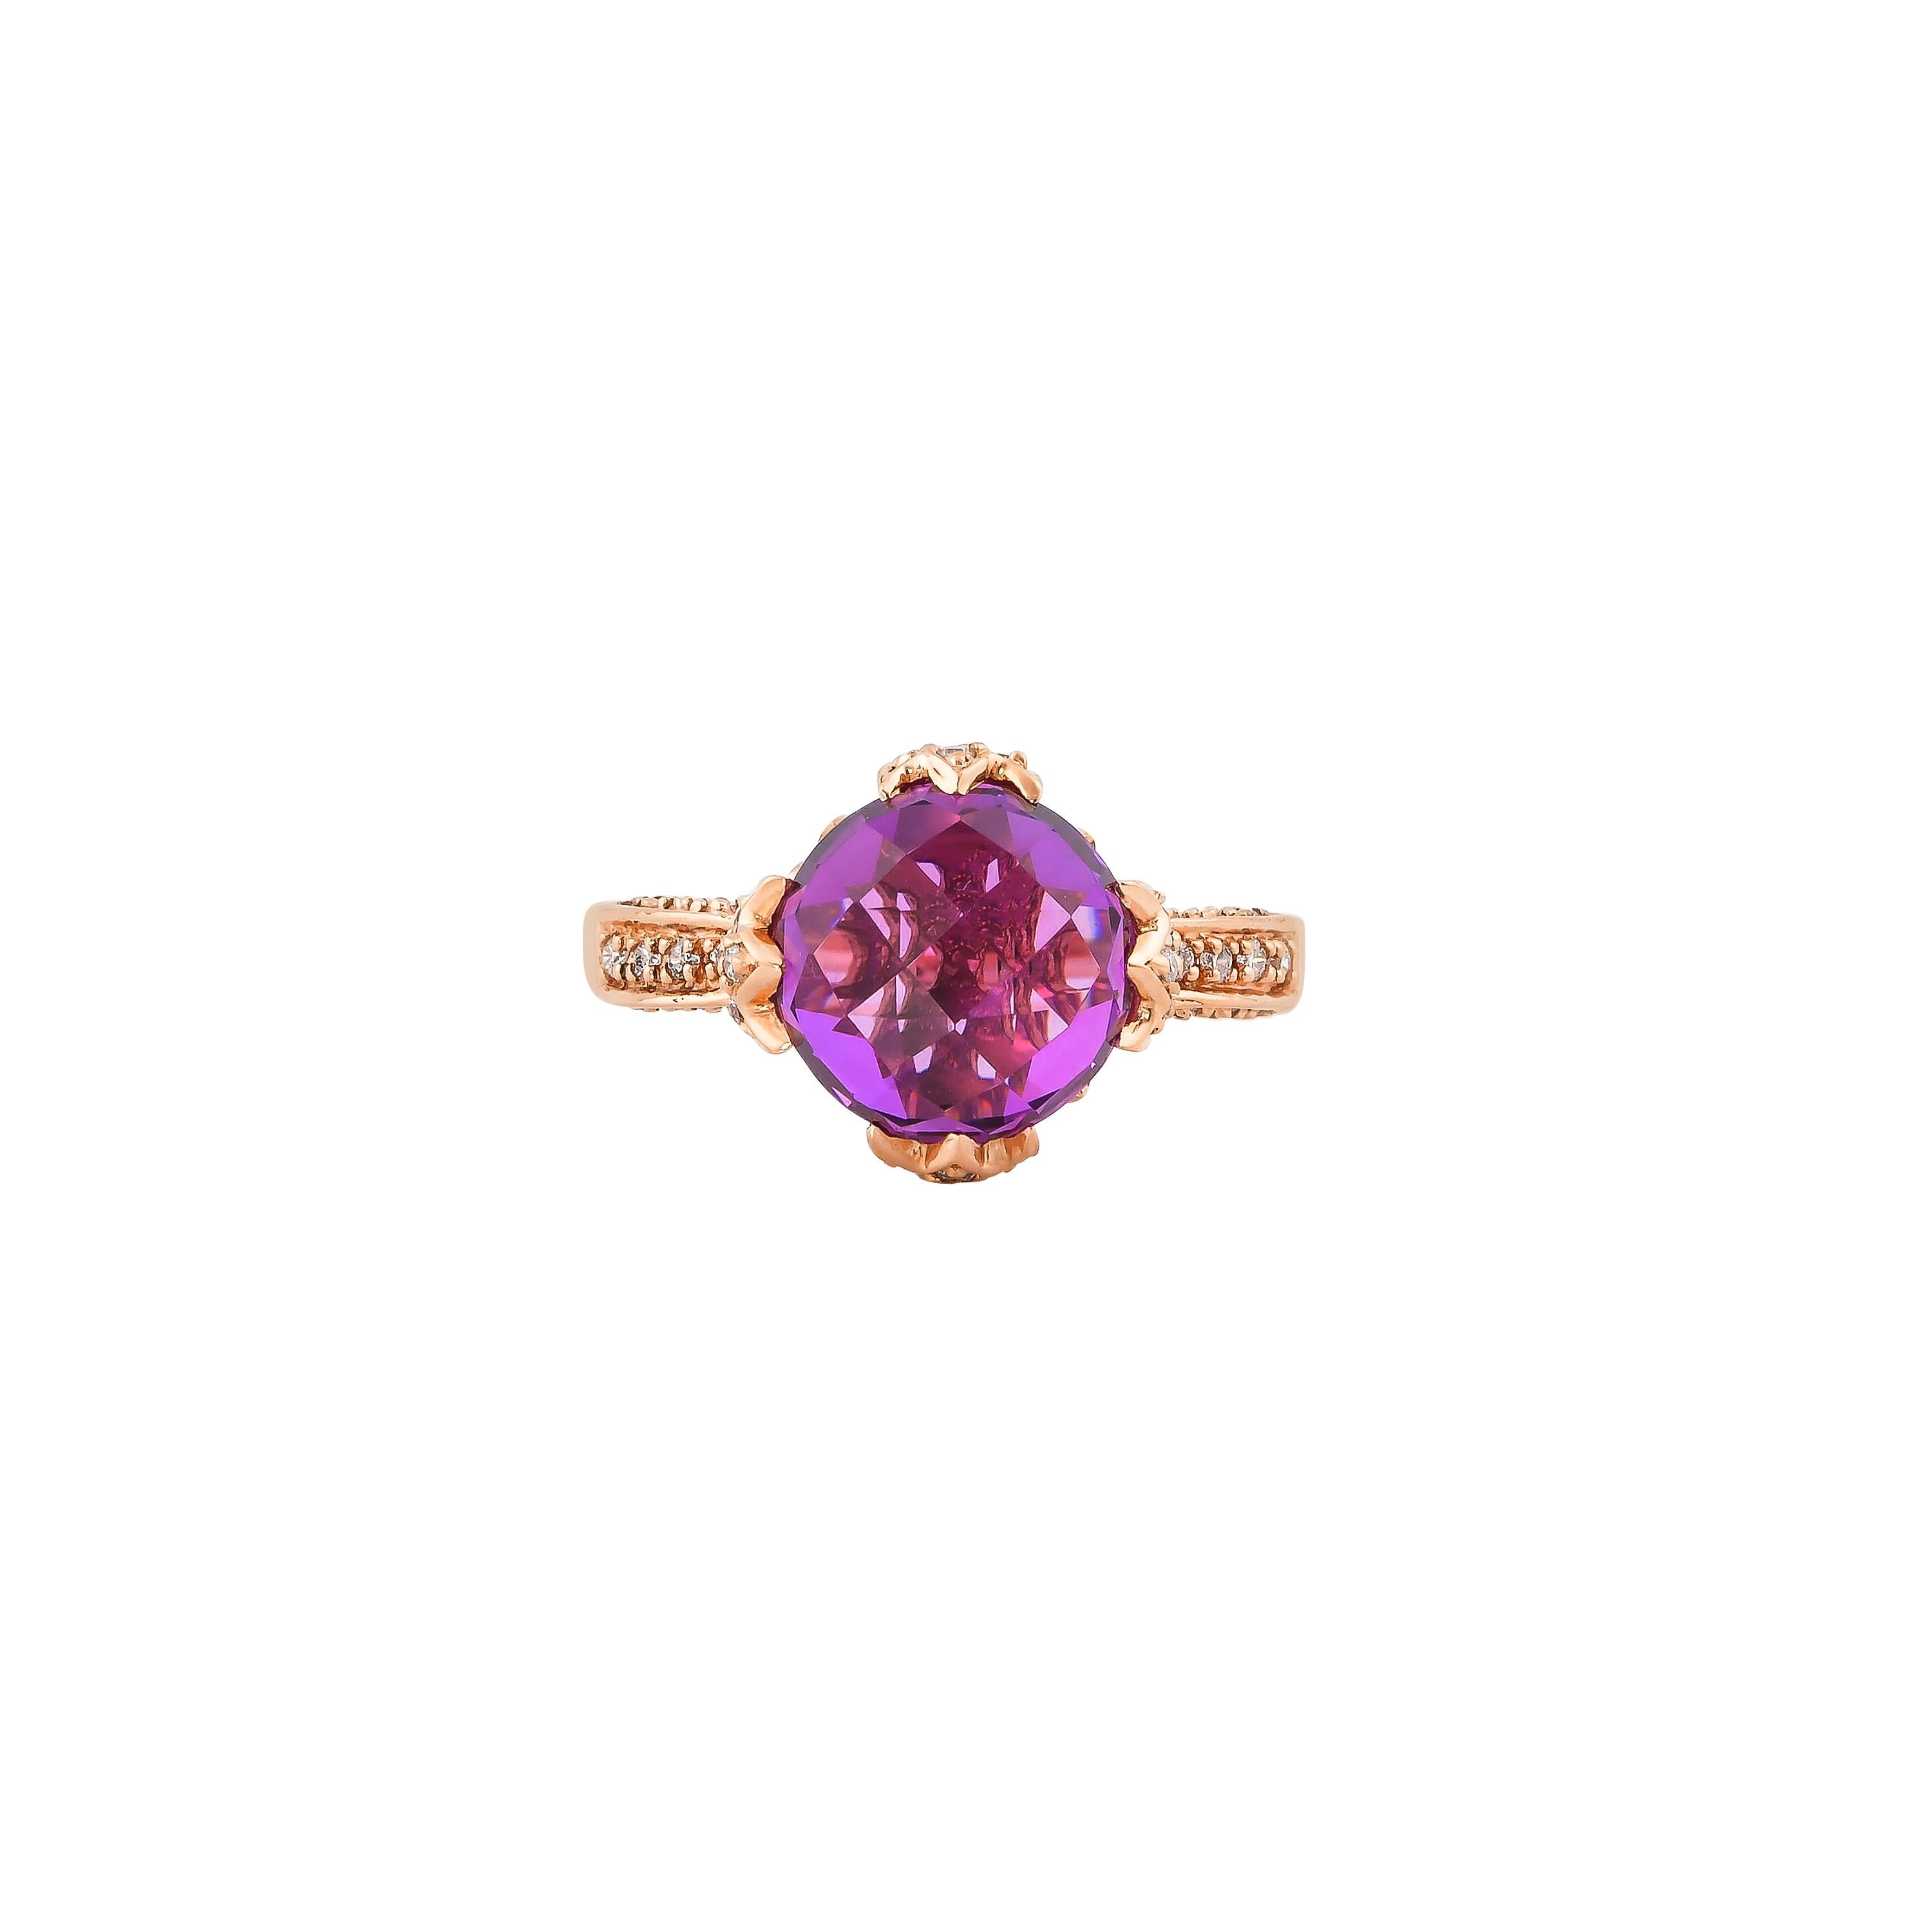 Round Cut 6.7 Carat Amethyst and Diamond Ring in 14 Karat Rose Gold For Sale